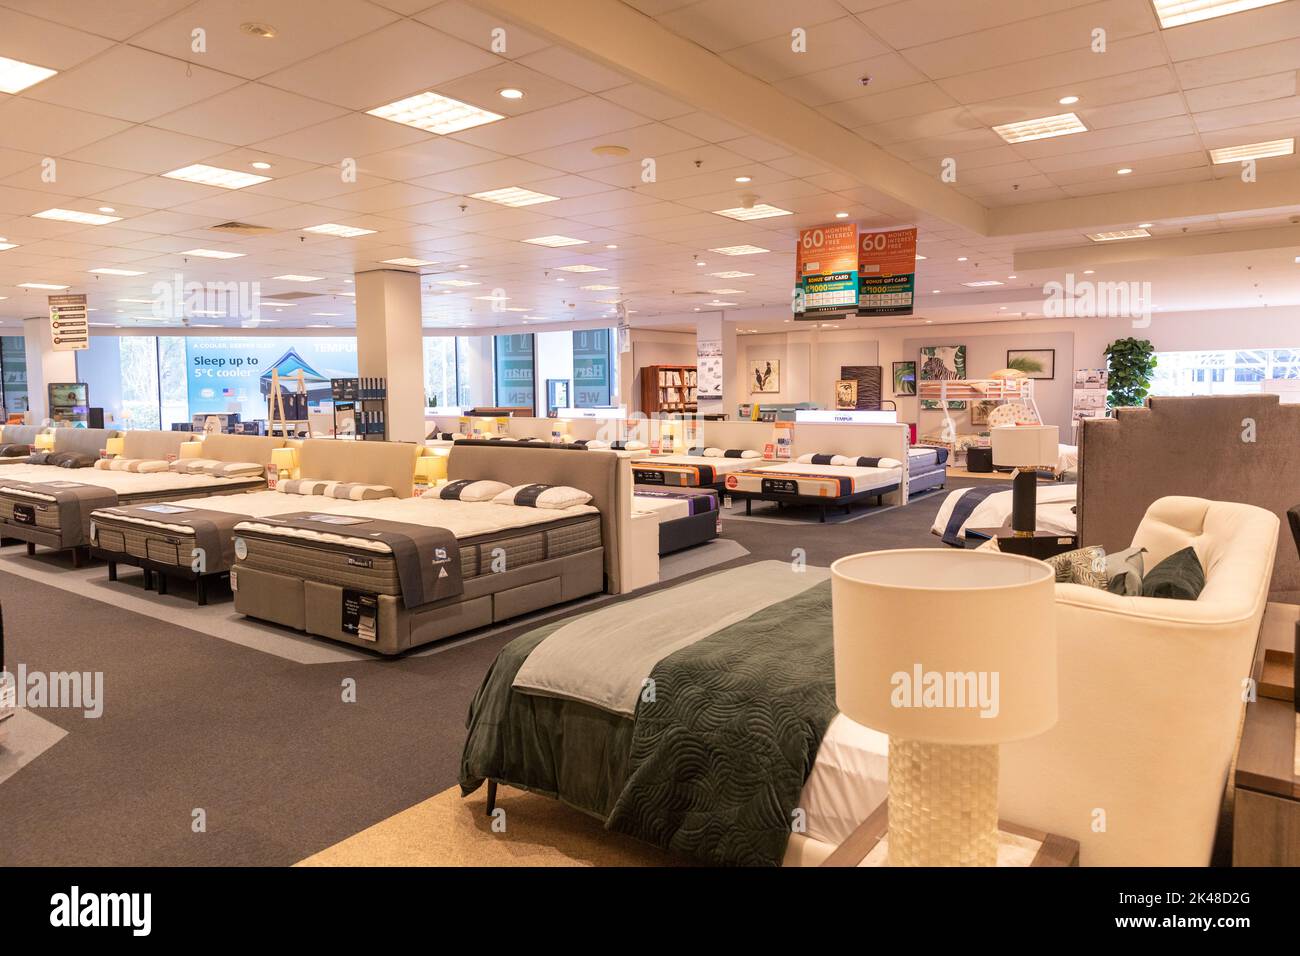 Beds on display for sale in a Domayne Harvey Norman store in Belrose Sydney,NSW,Australia Stock Photo